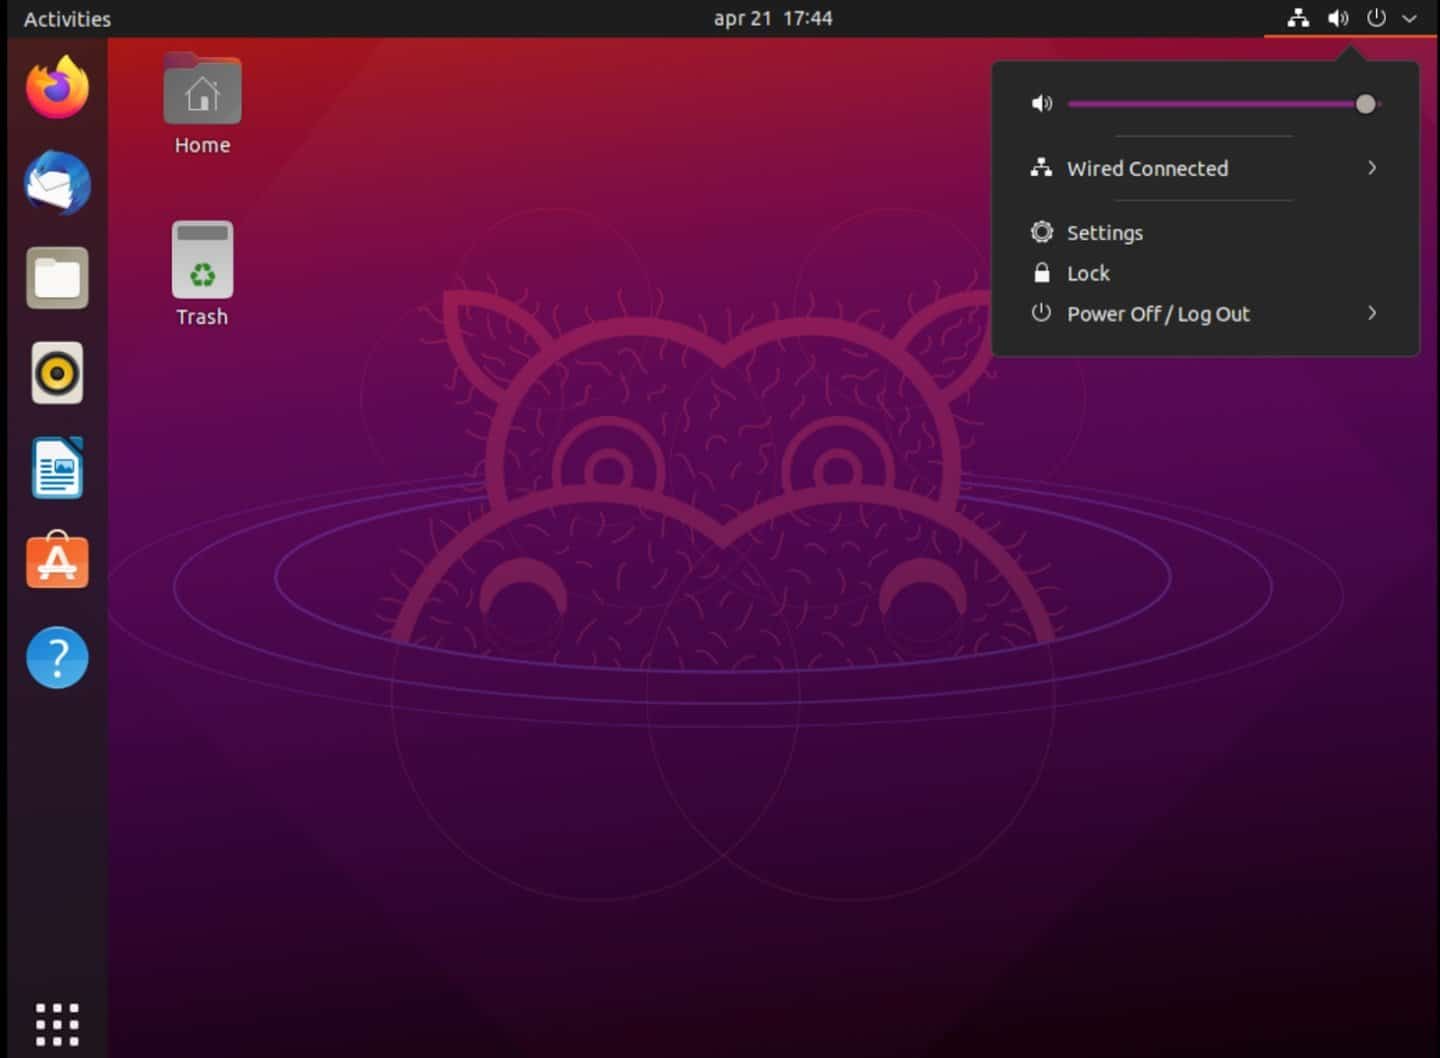 Ubuntu 21.04 (Hirsute Hippo) ISO’s are ready to download